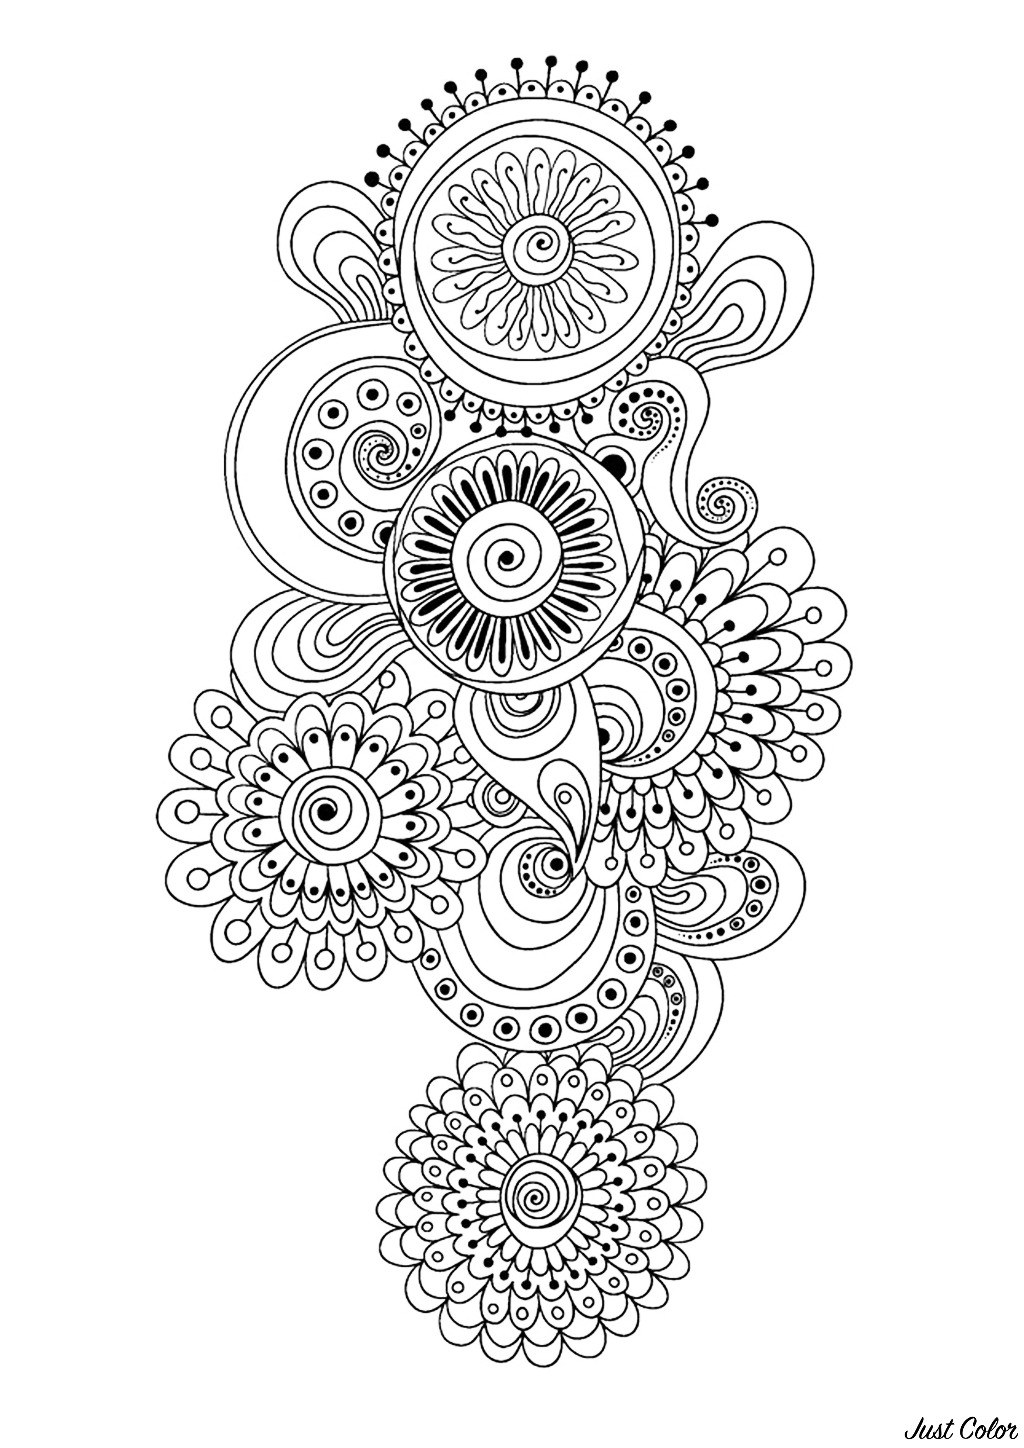 Picture of: Zen antistress abstract pattern inspired by flowers  by